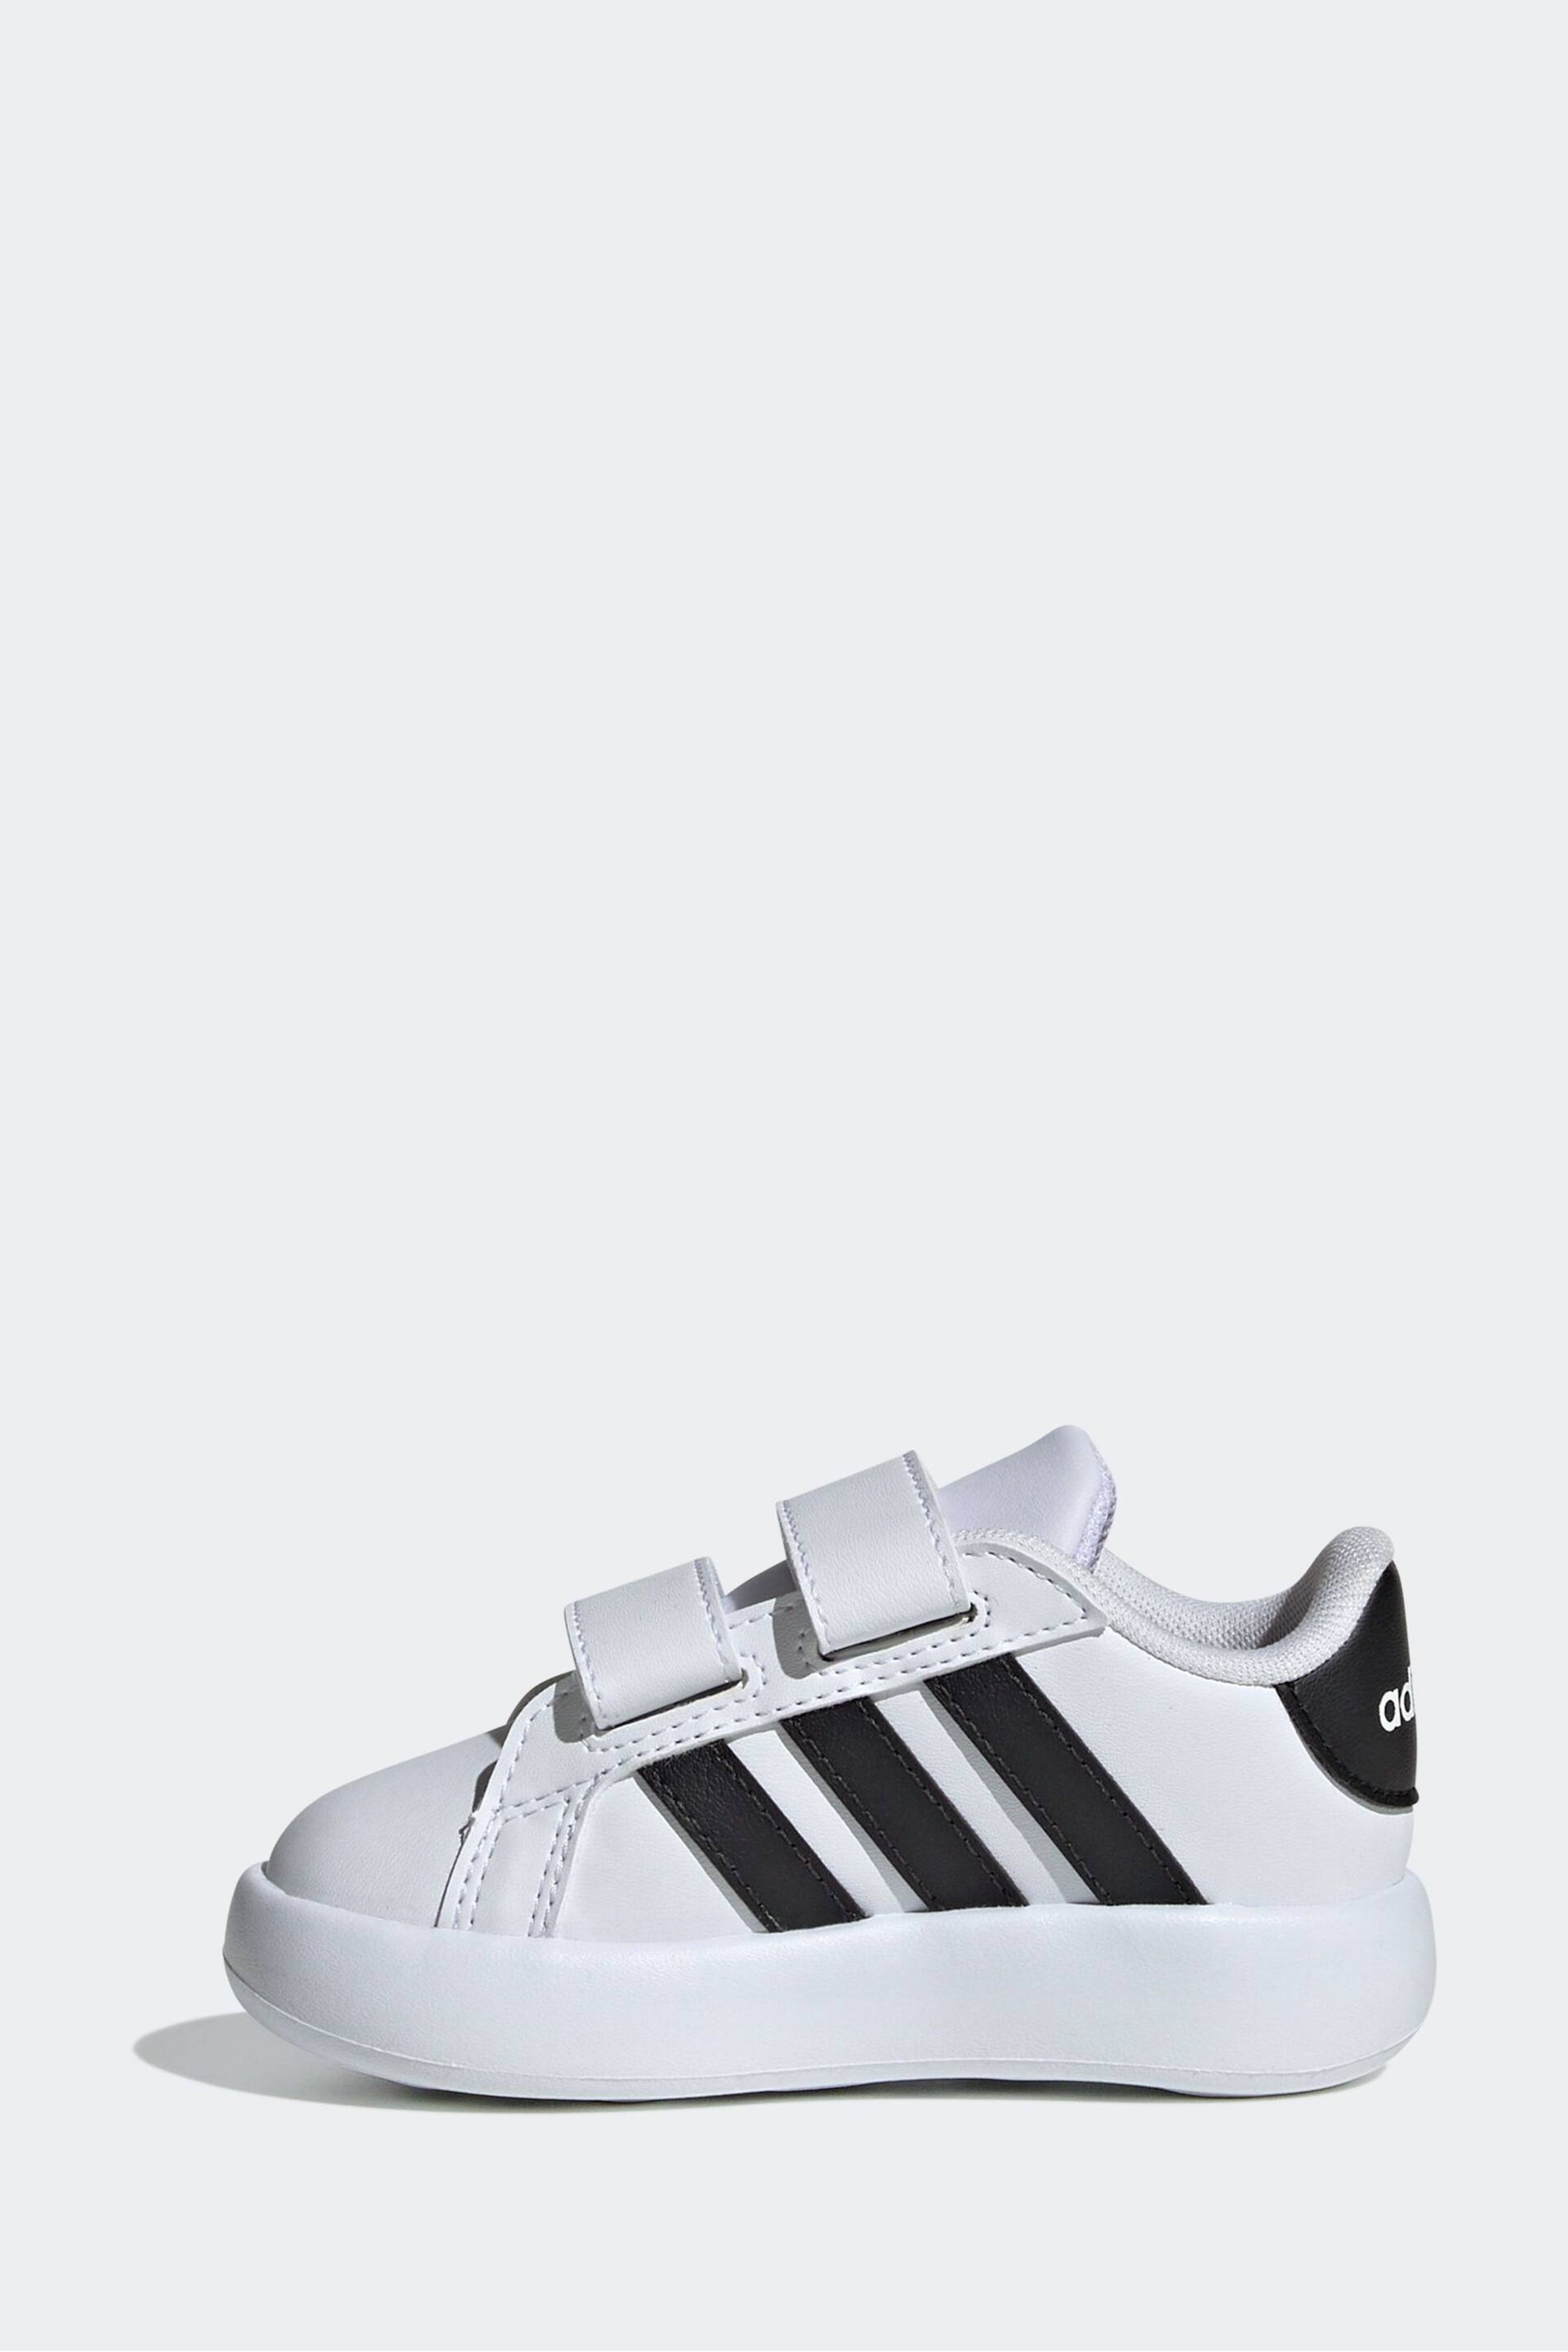 adidas Off White Kids Grand Court 2.0 Shoes - Image 2 of 9